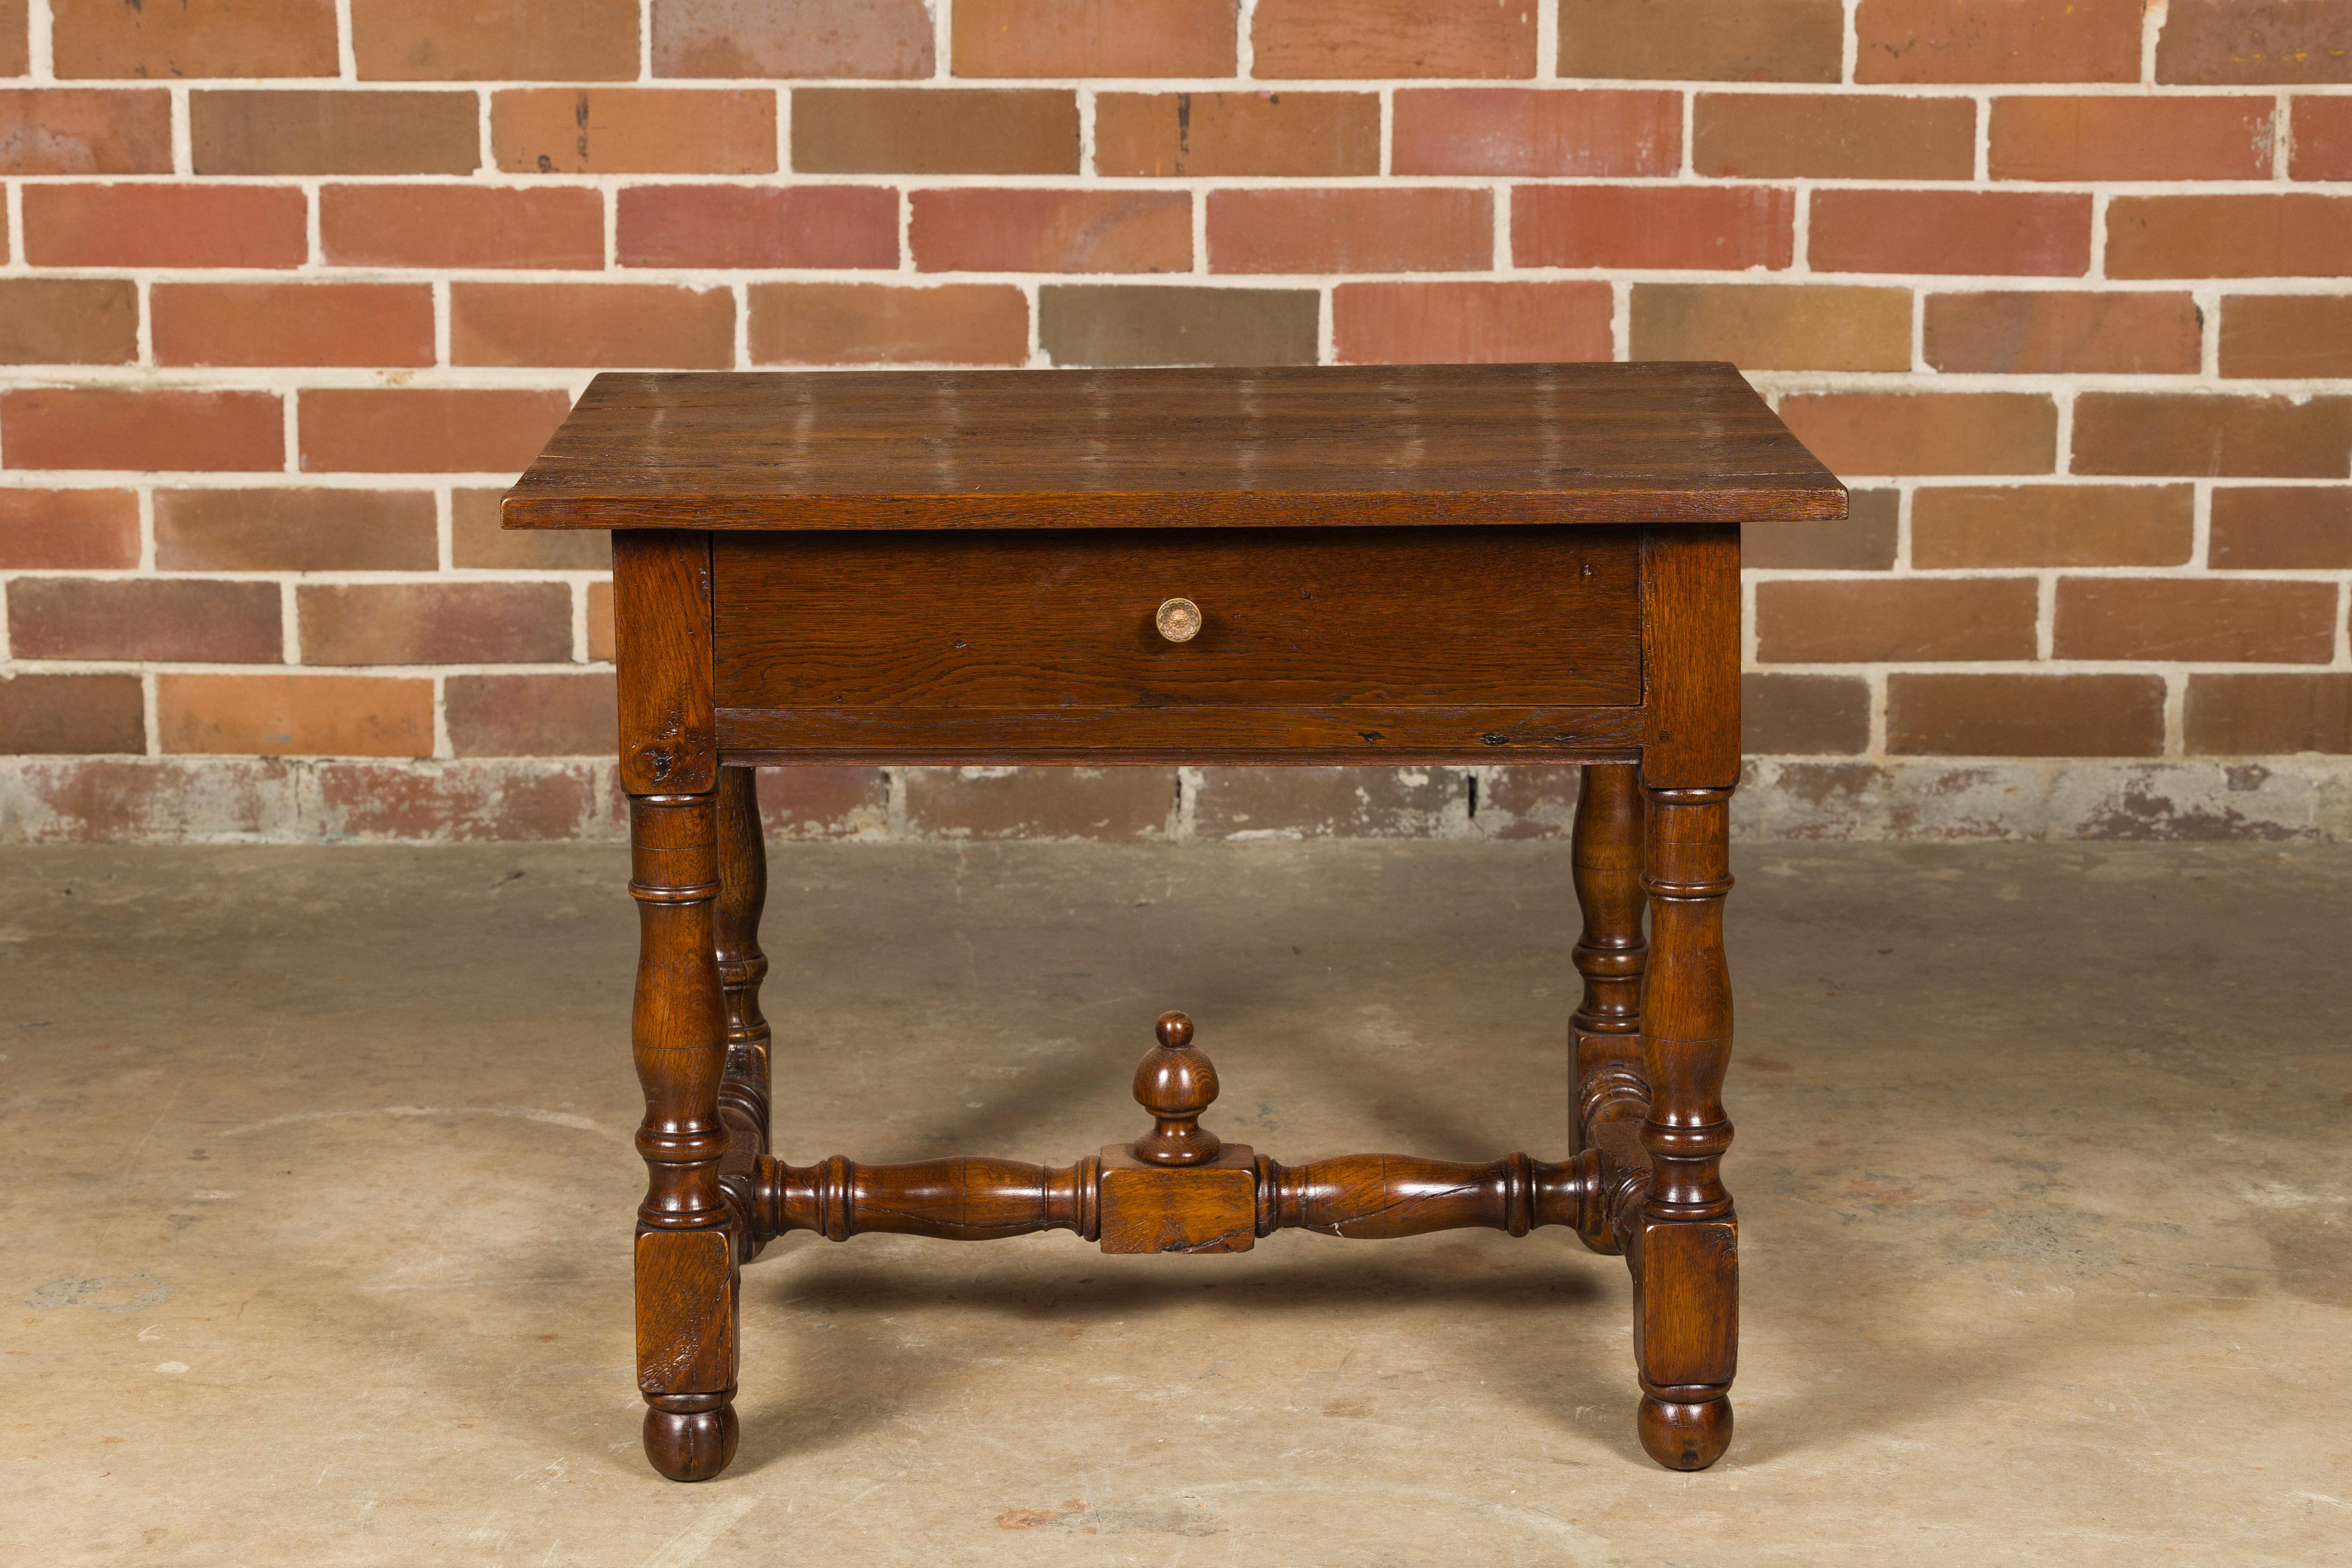 An English oak side table from the 18th century with single drawer, turned base and H-Form cross stretcher with carved finial. This 18th-century English oak side table exudes timeless charm and craftsmanship, making it a delightful addition to any